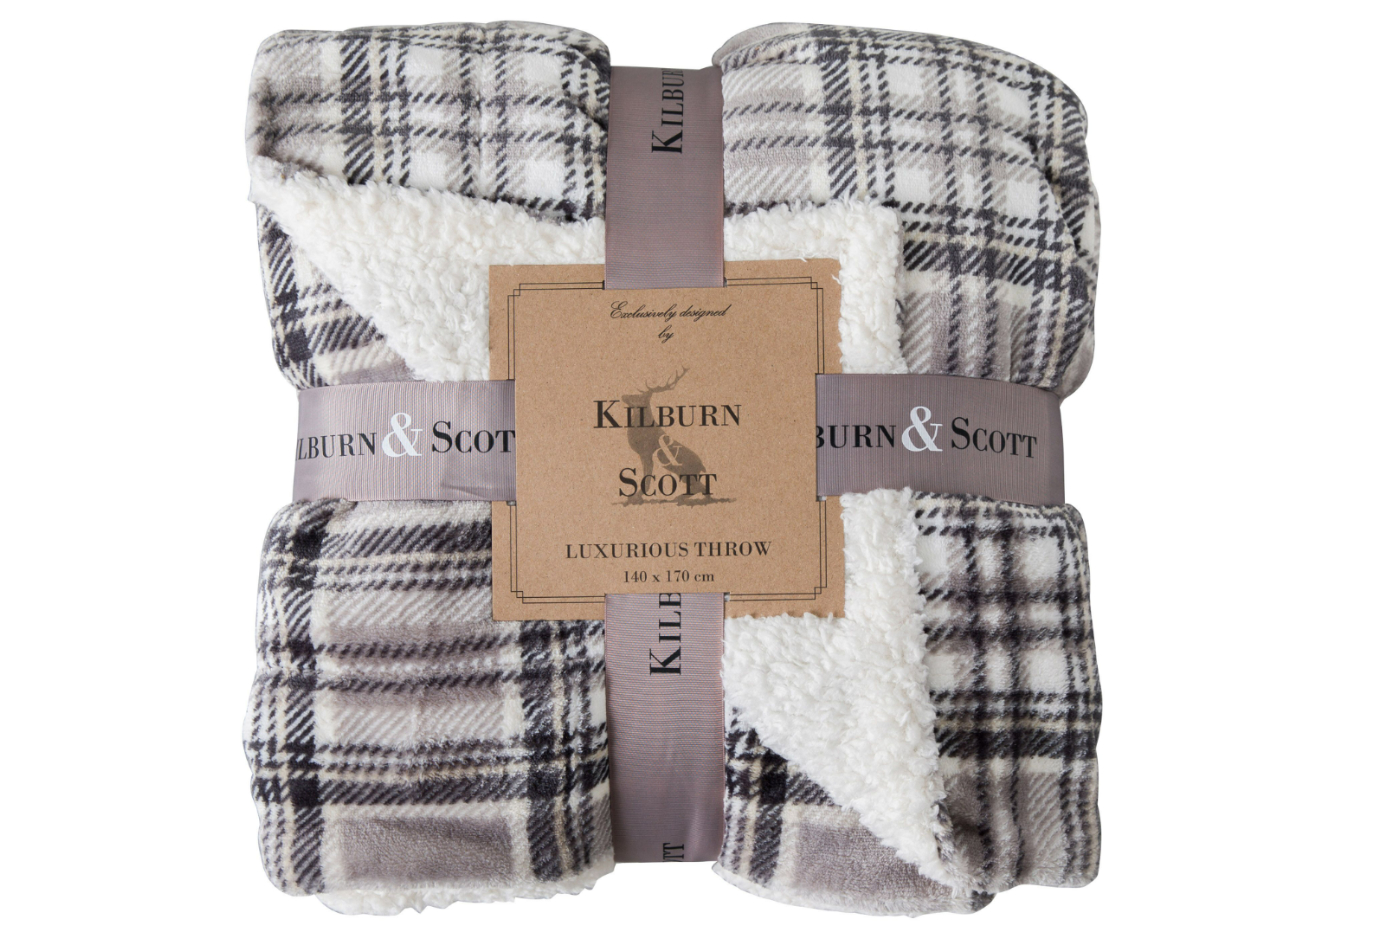 View Neutral Grey And Cream Checked Printed Sherpa Throw Reversible With Soft Touch Knitted Other Side Kilburn Moorland 1700 x 1400mm information